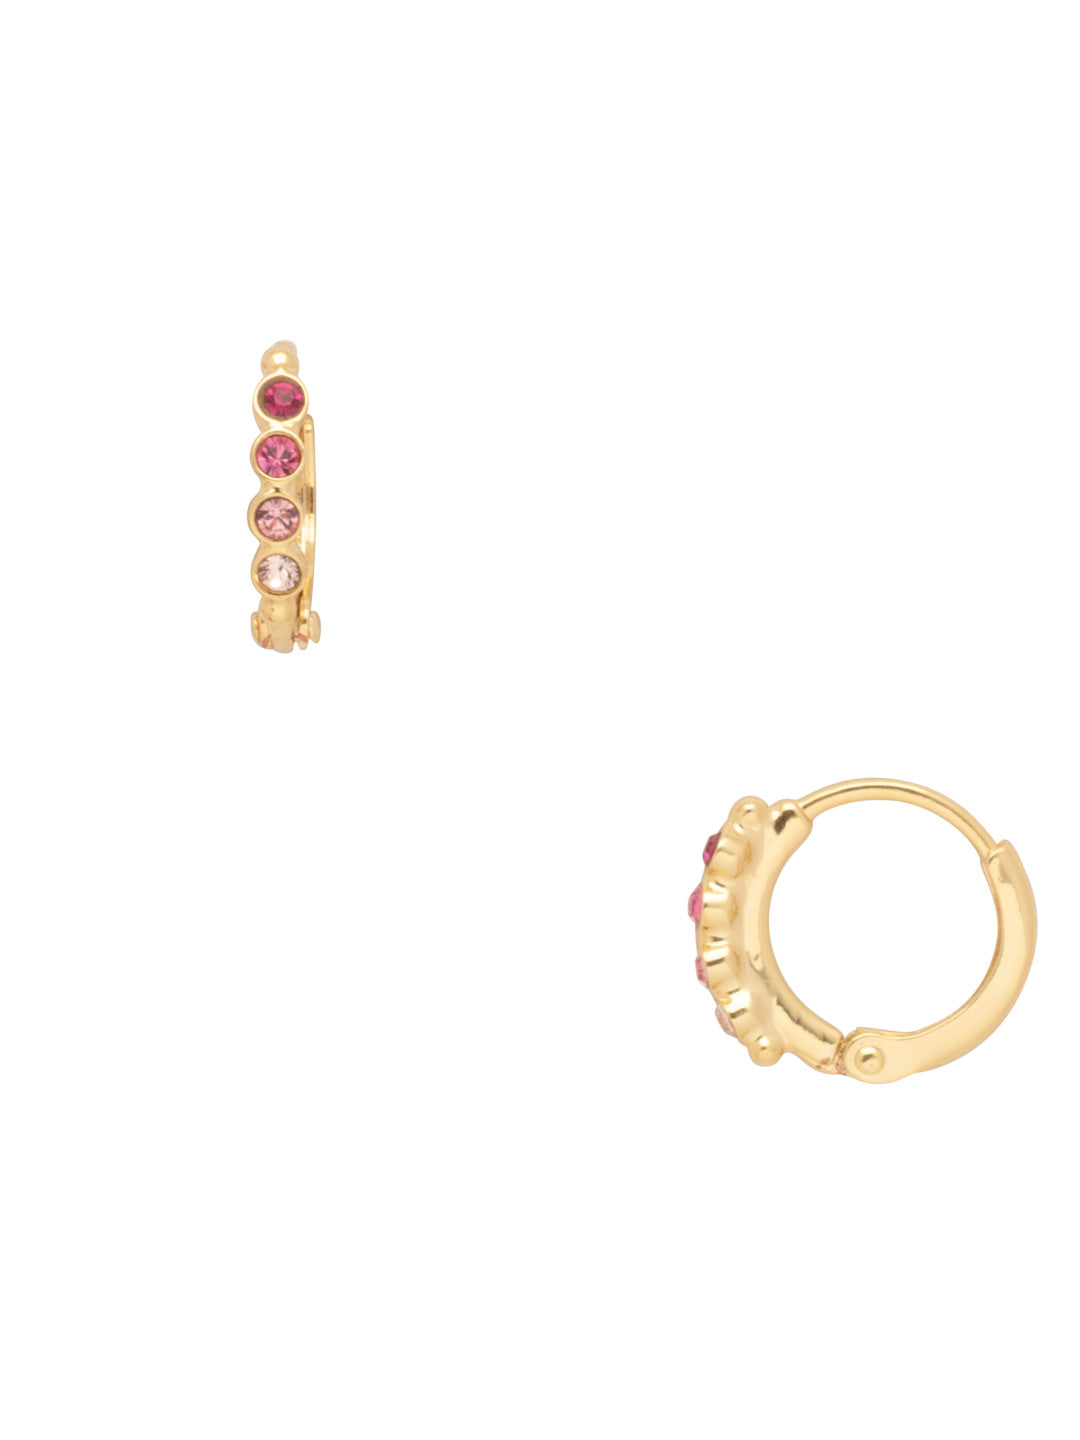 Mini Embellished Huggie Hoop Earrings - EFN6BGBFL - <p>The Mini Embellished Huggie Hoop Earrings feature small crystal embellishments on a tiny huggie hoop. From Sorrelli's Big Flirt collection in our Bright Gold-tone finish.</p>